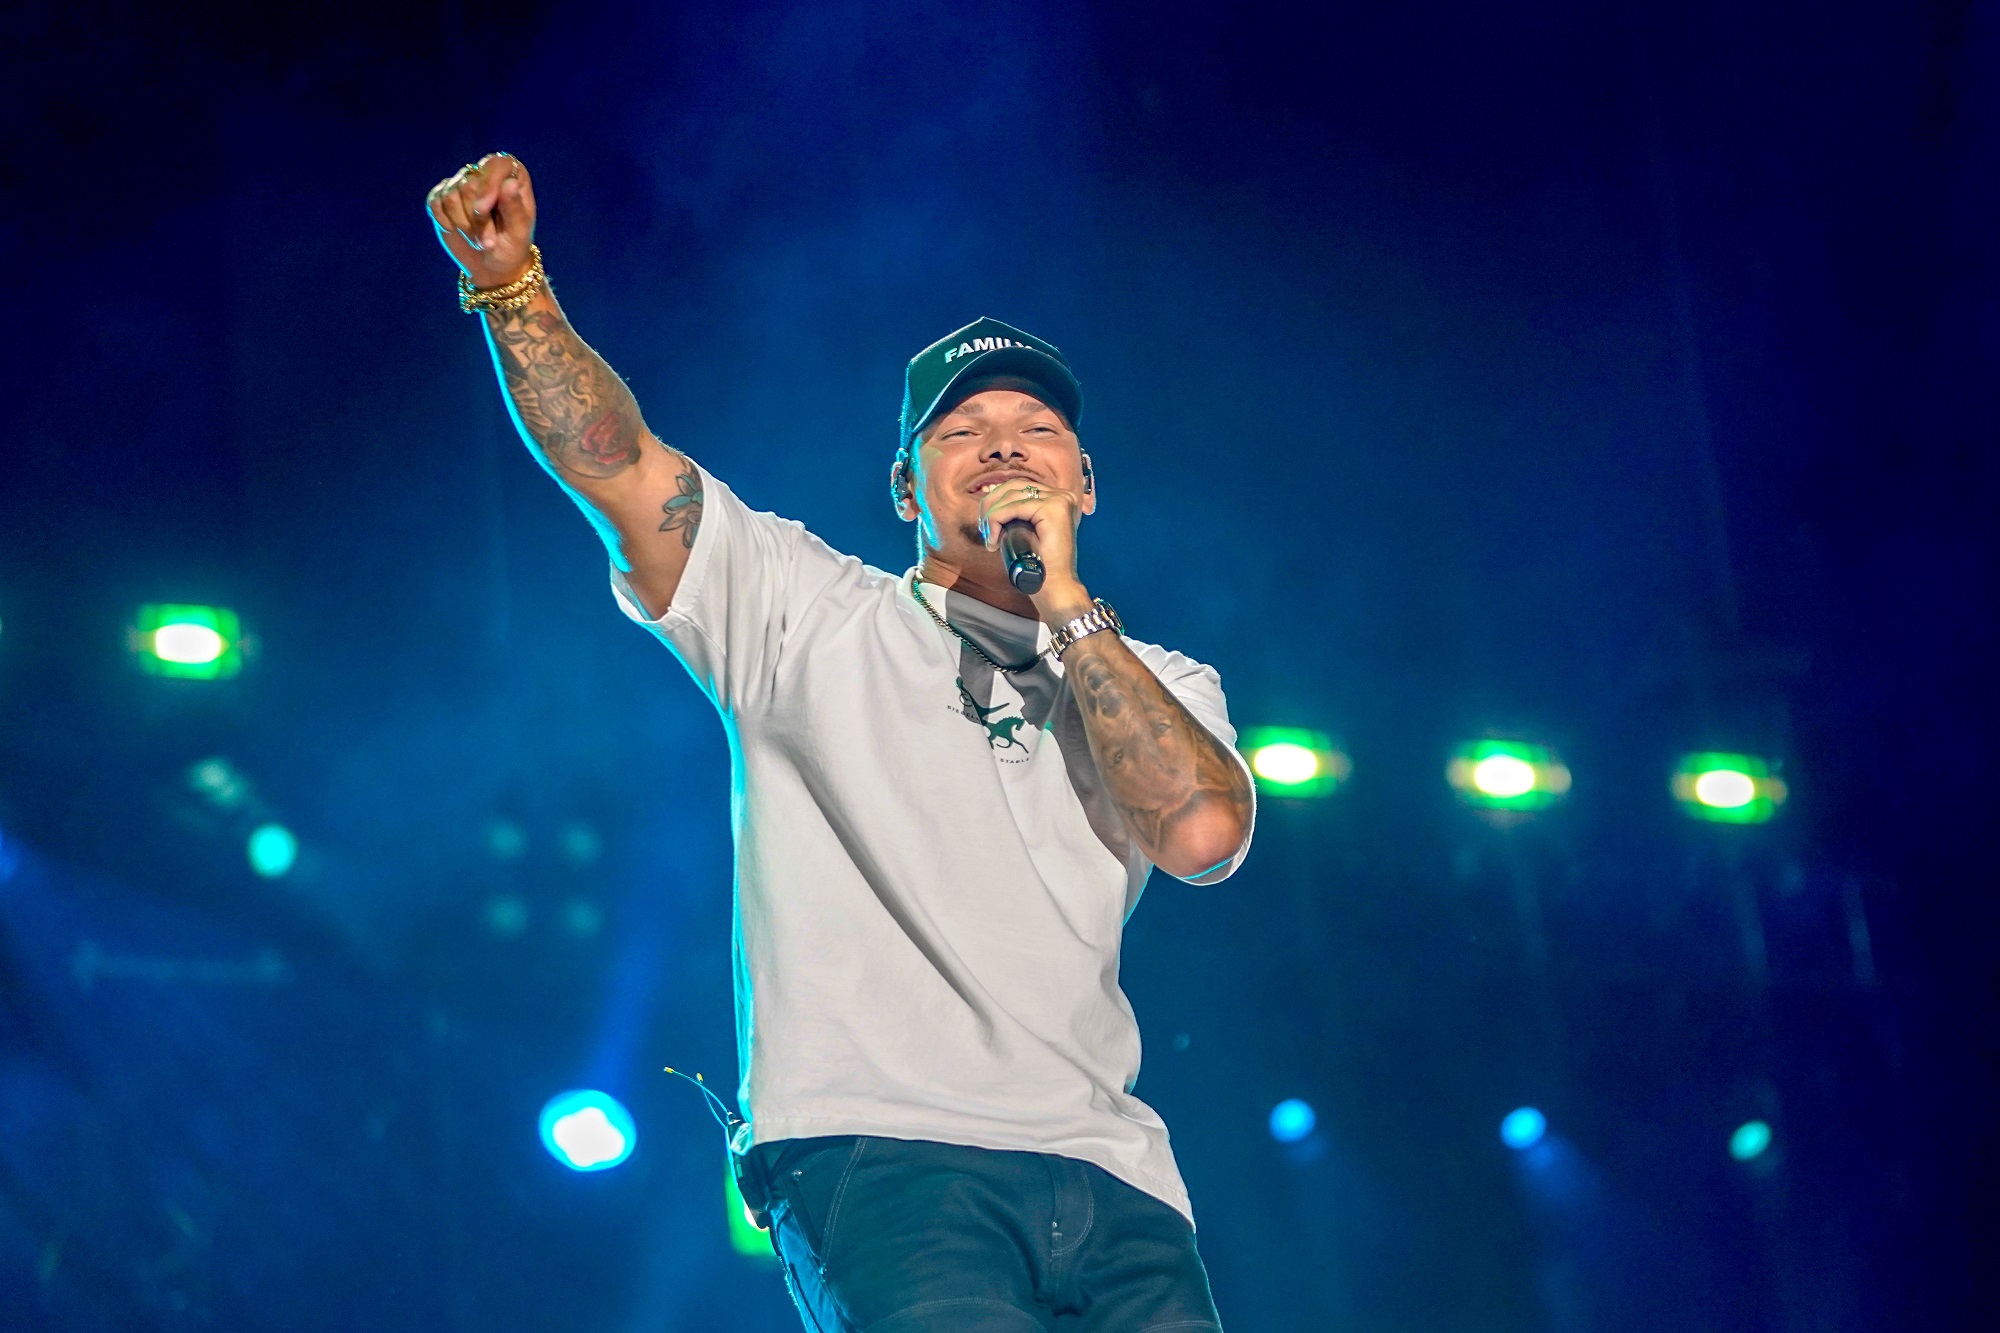 Kane Brown performs during day 2 of the CMA Fest 2022